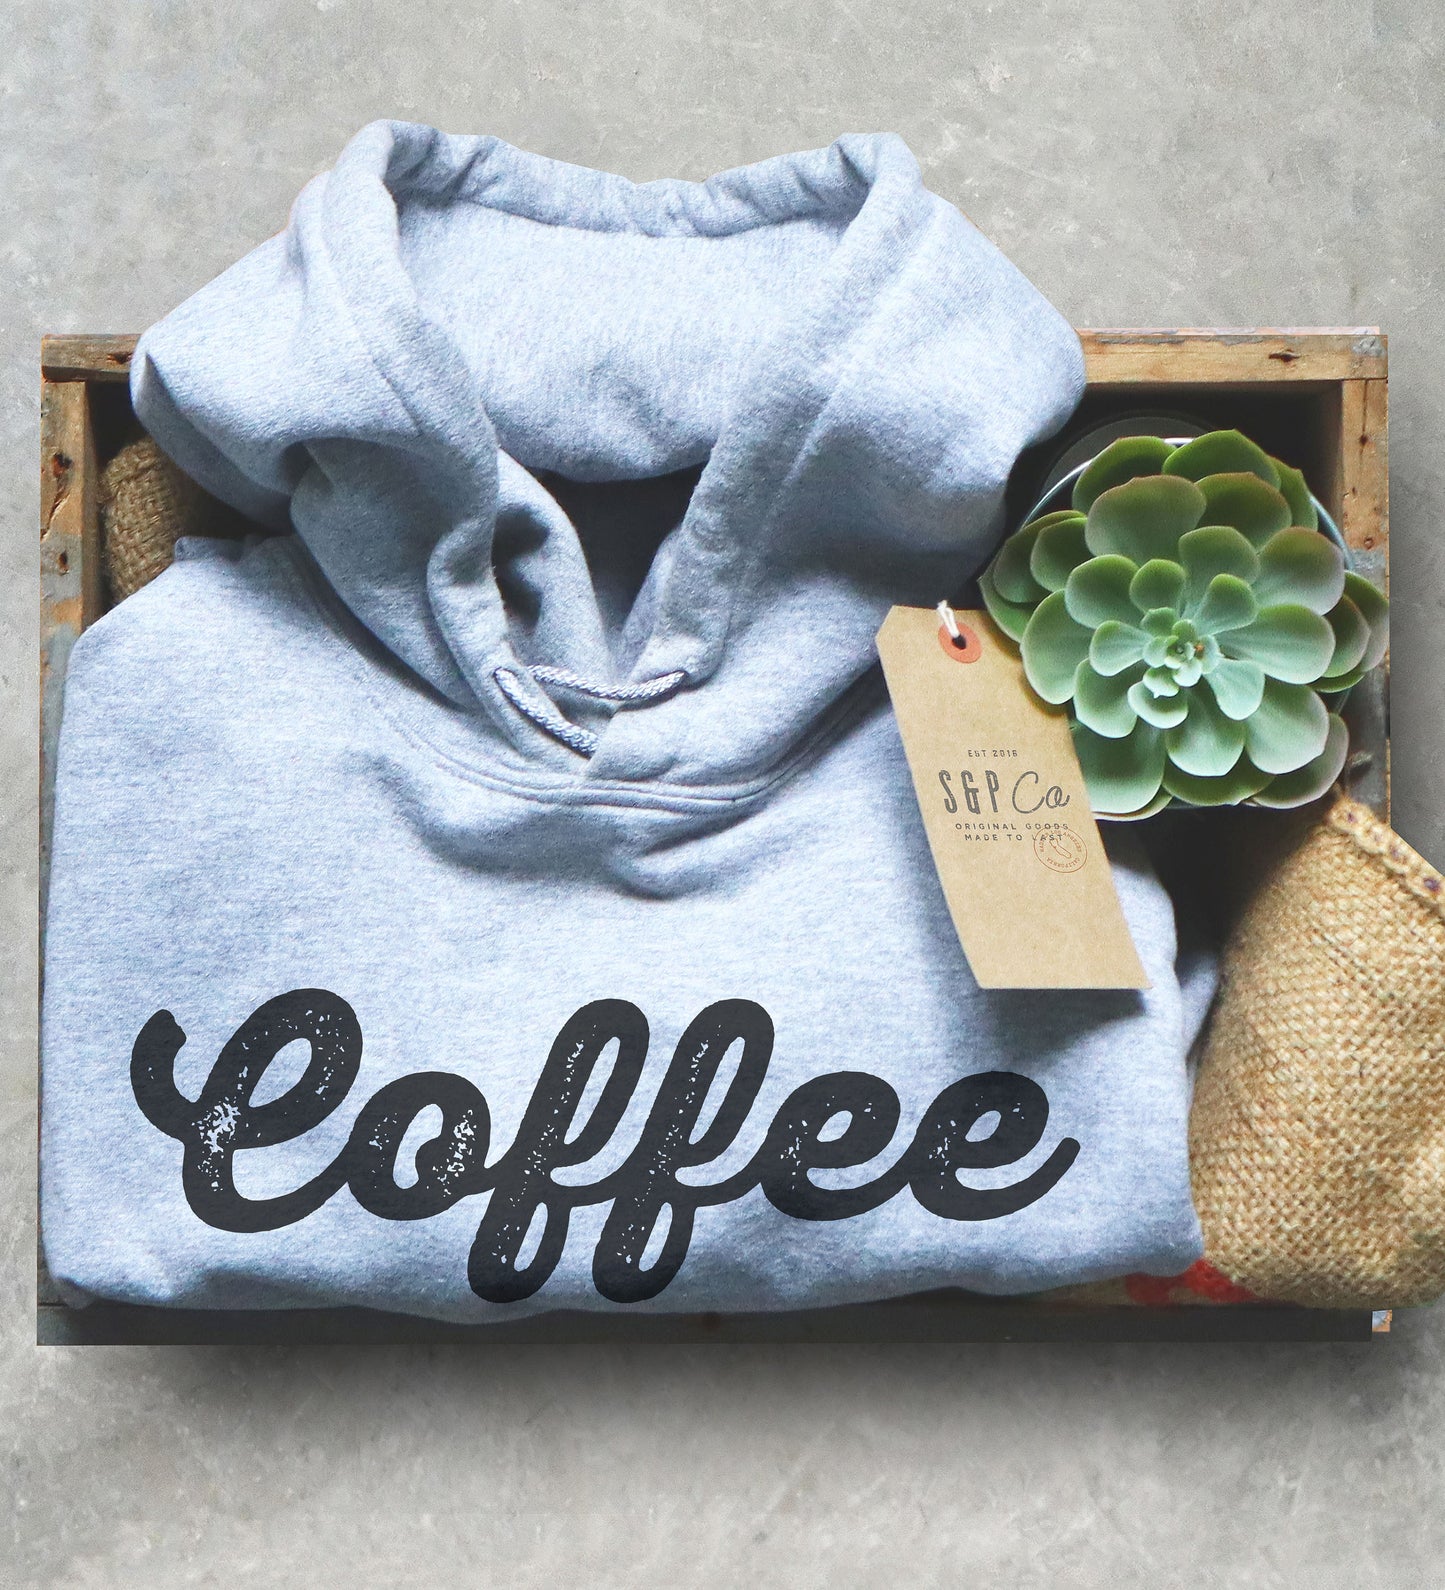 Coffee Then Cows Hoodie - cow shirt